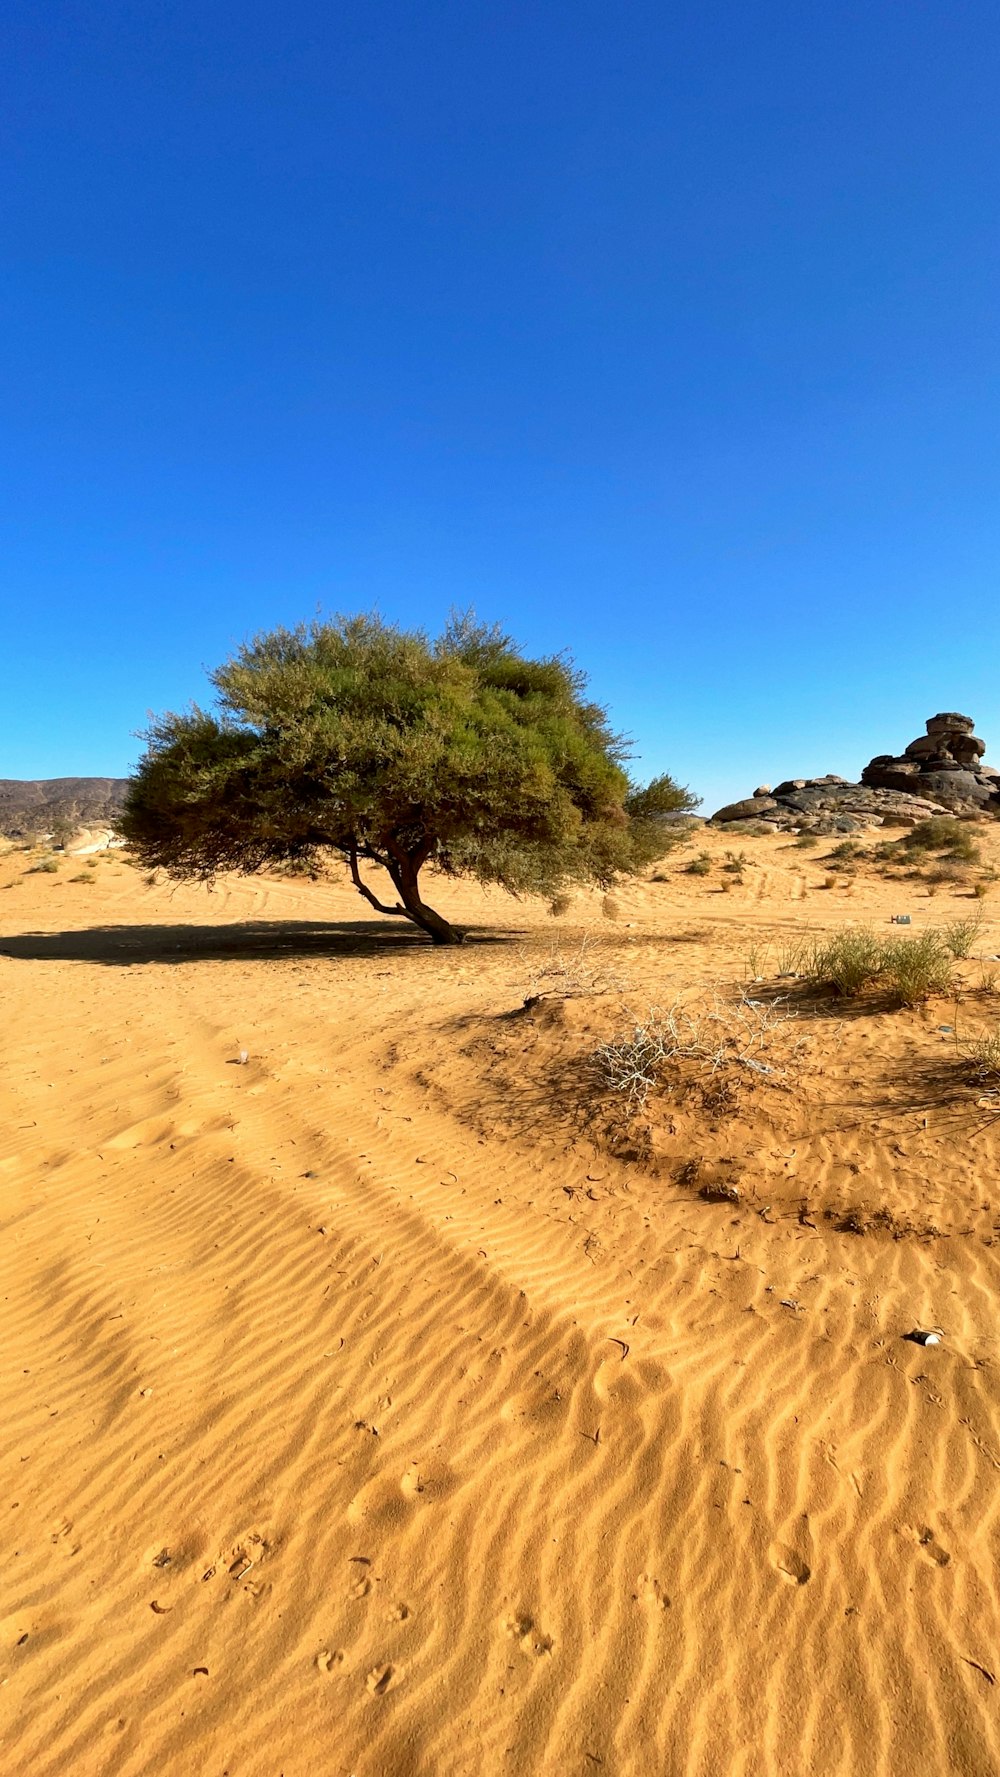 a lone tree in the middle of a desert